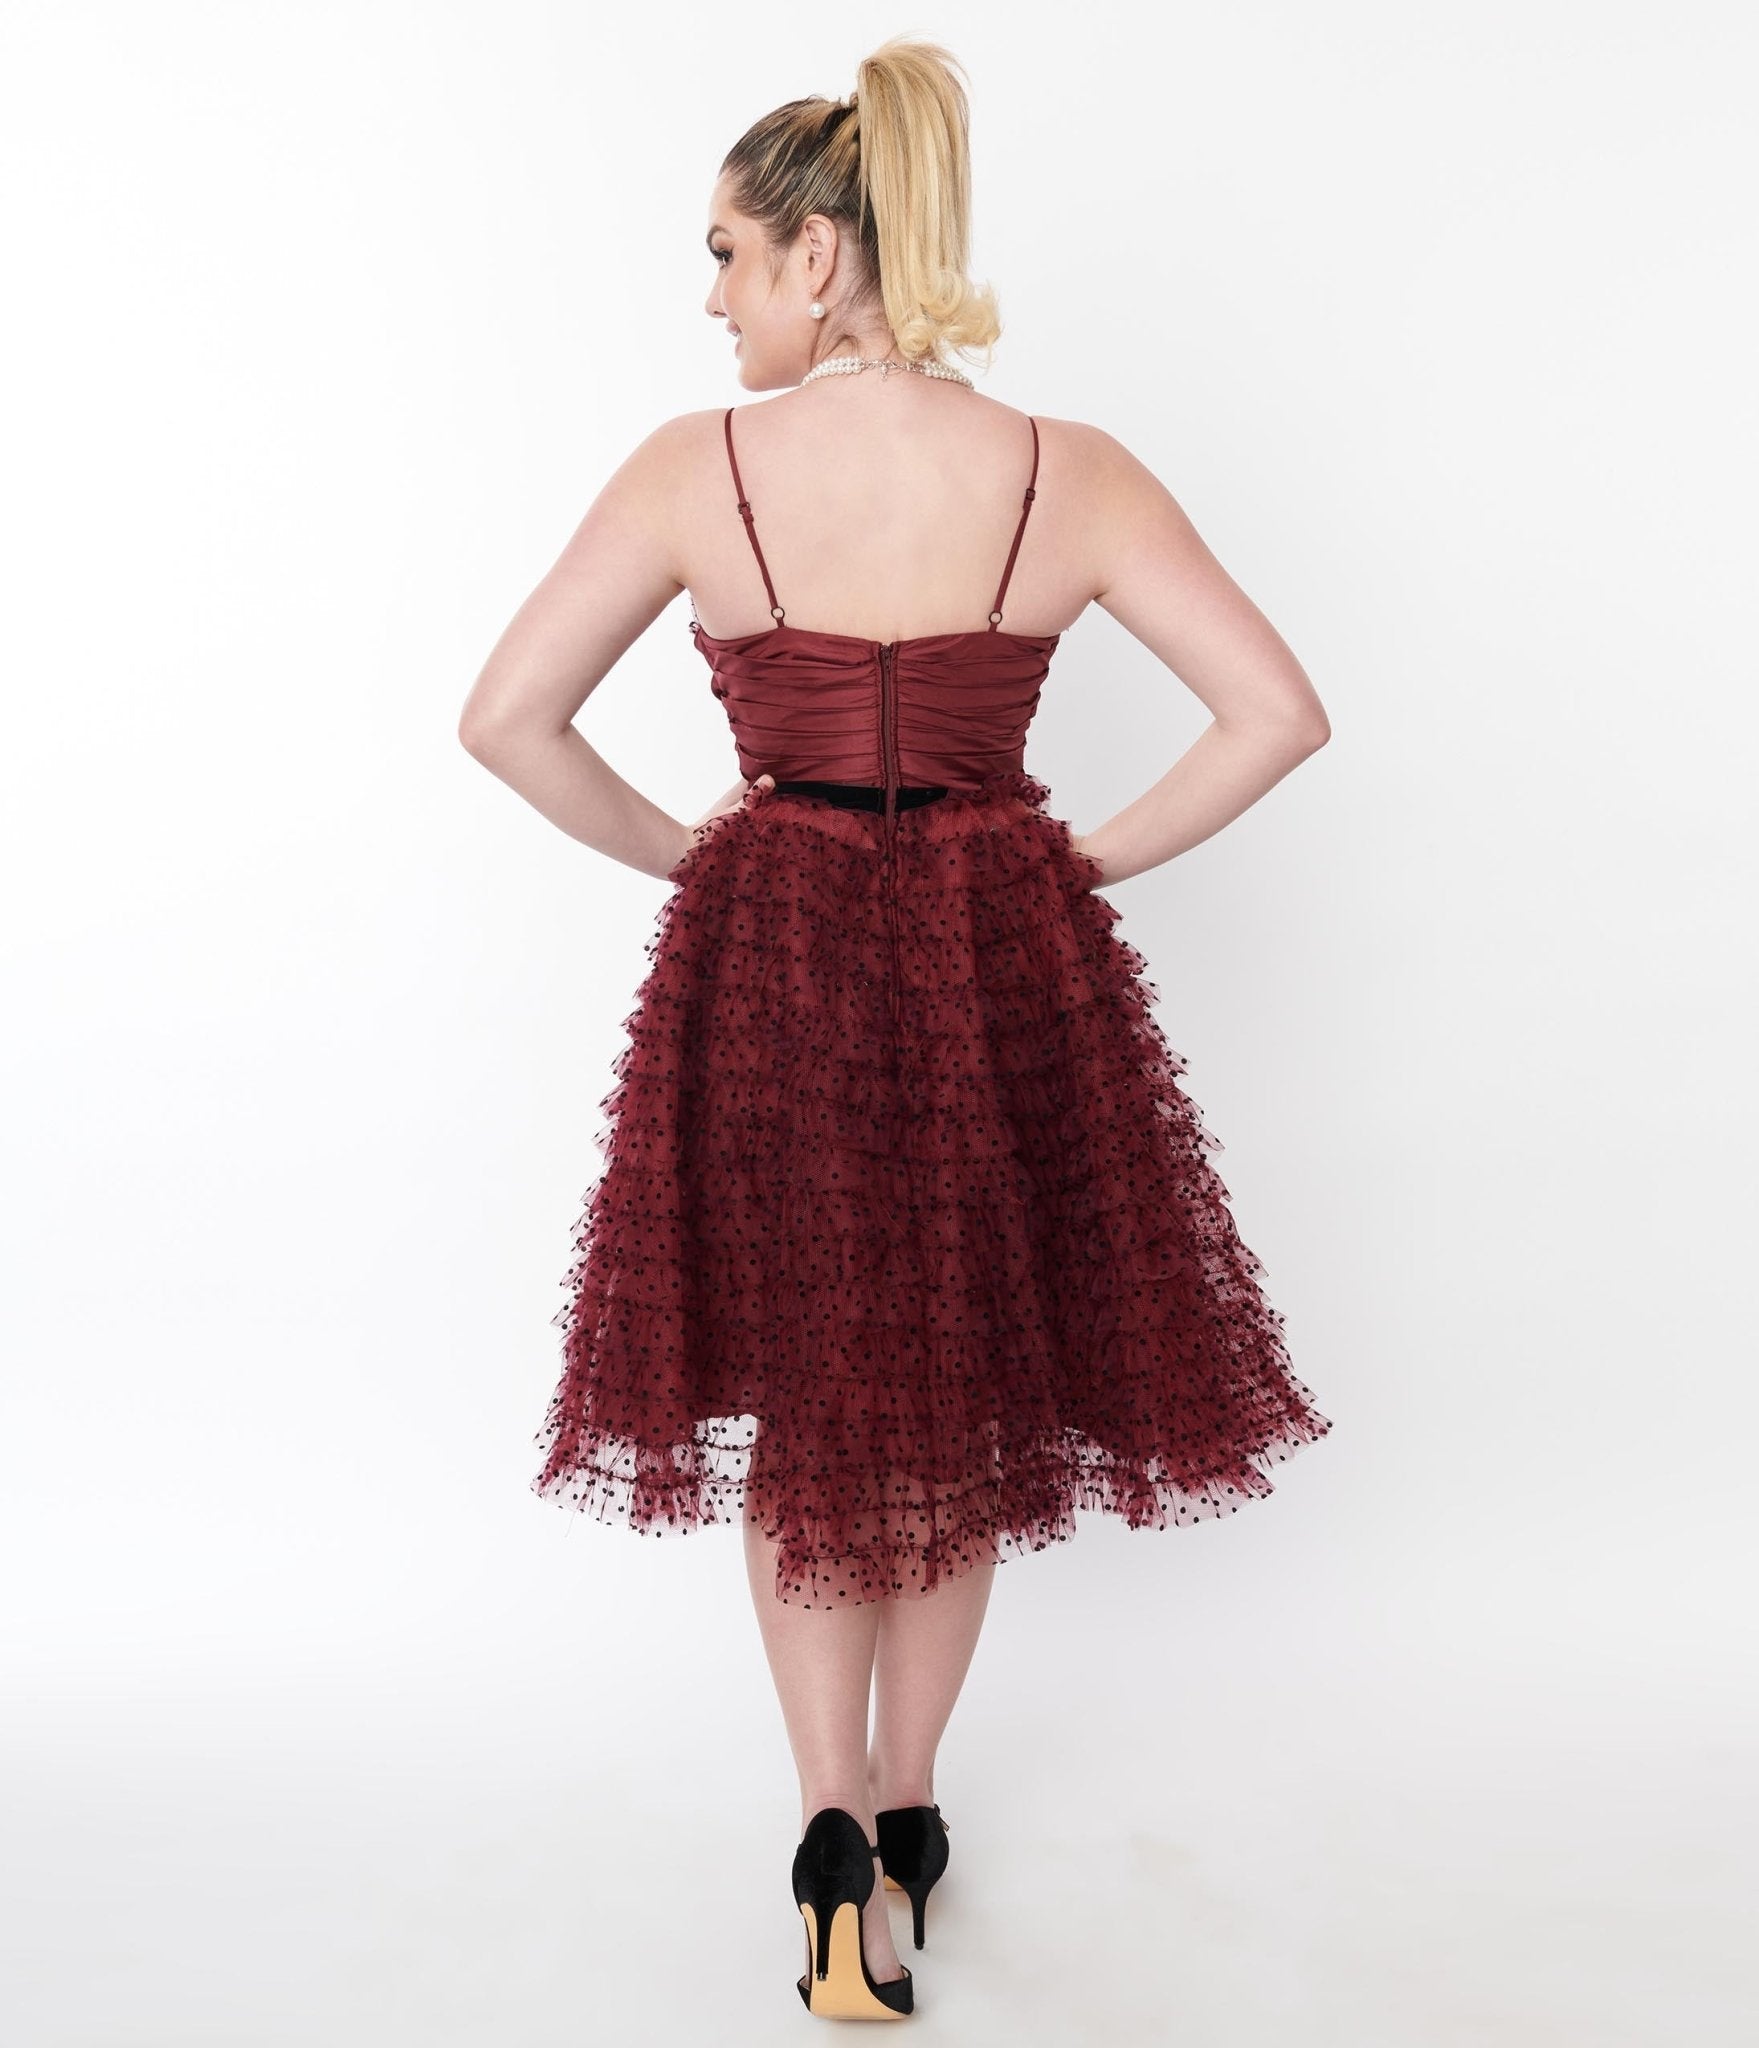 A Floral embroidered, strapless tulle dress with wine colored tulle fabric.